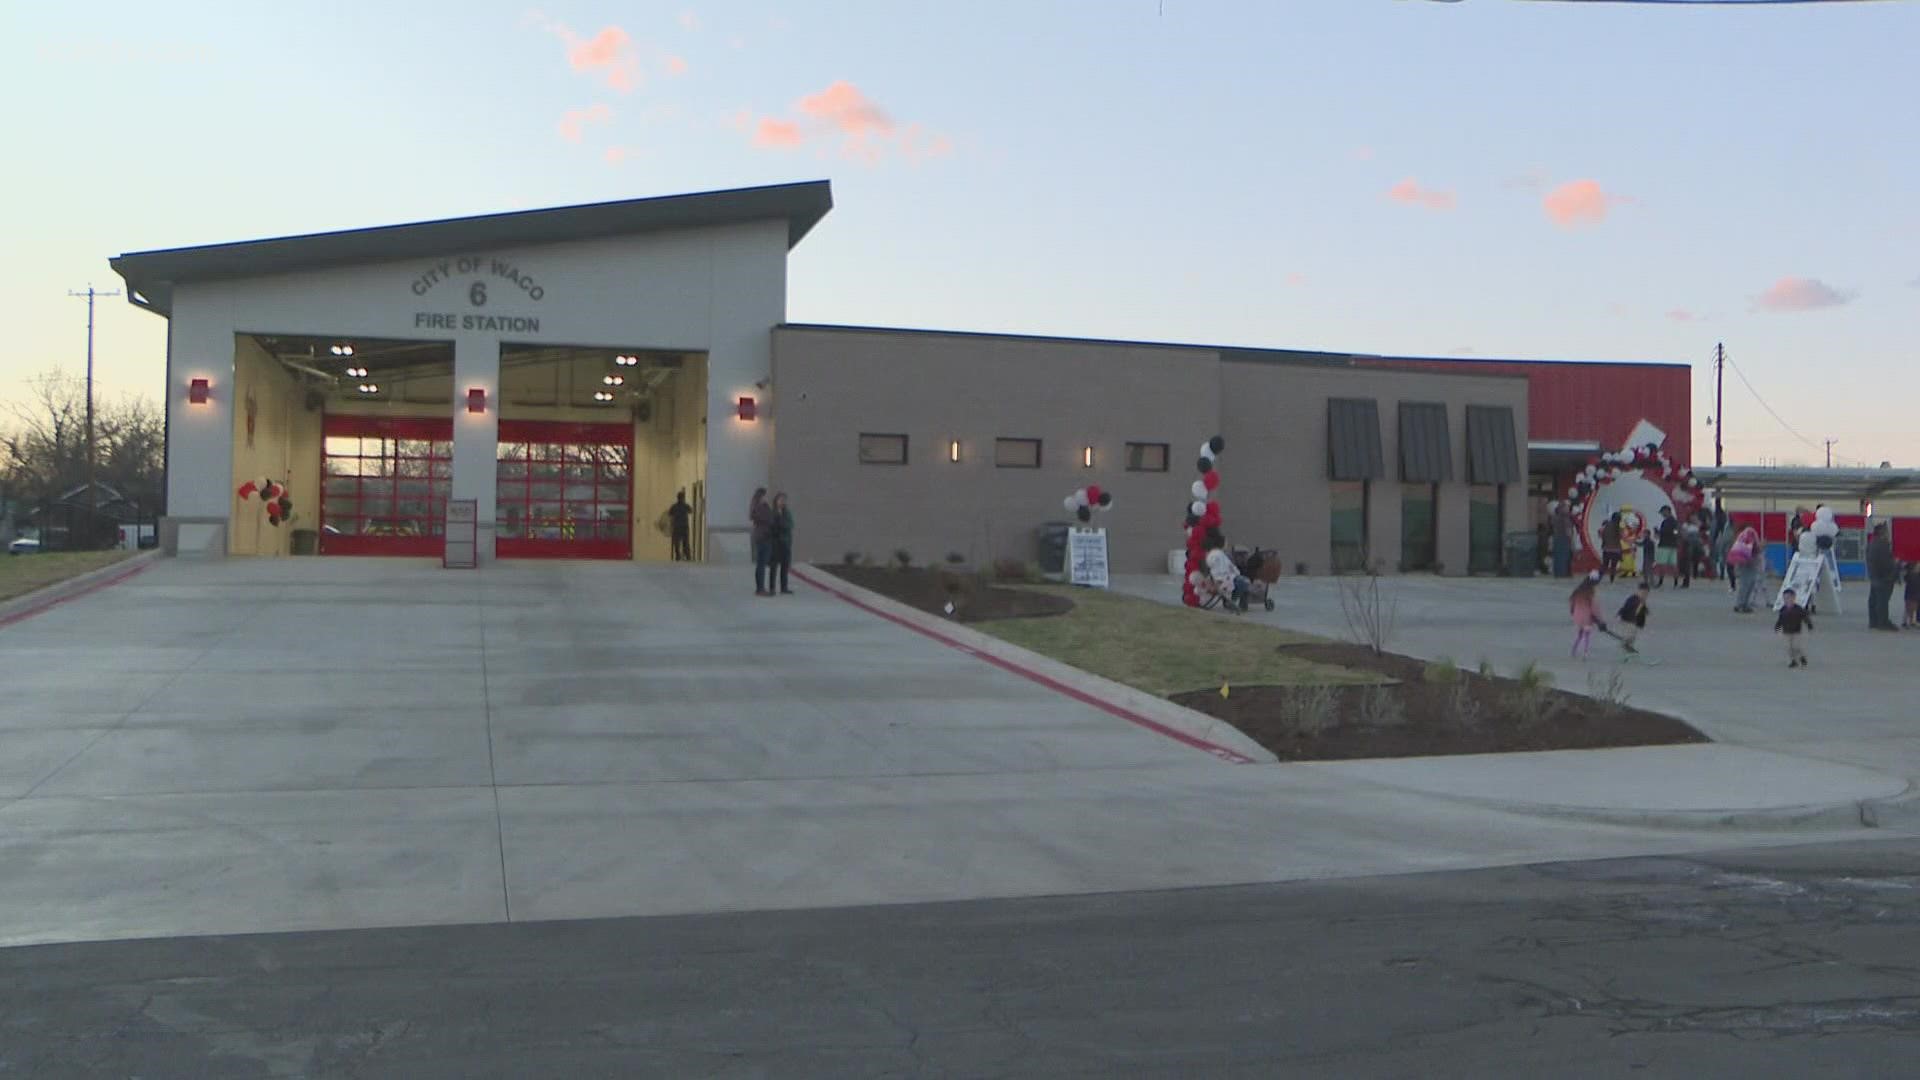 The Waco Fire Department celebrated the opening of a brand new fire station Wednesday.